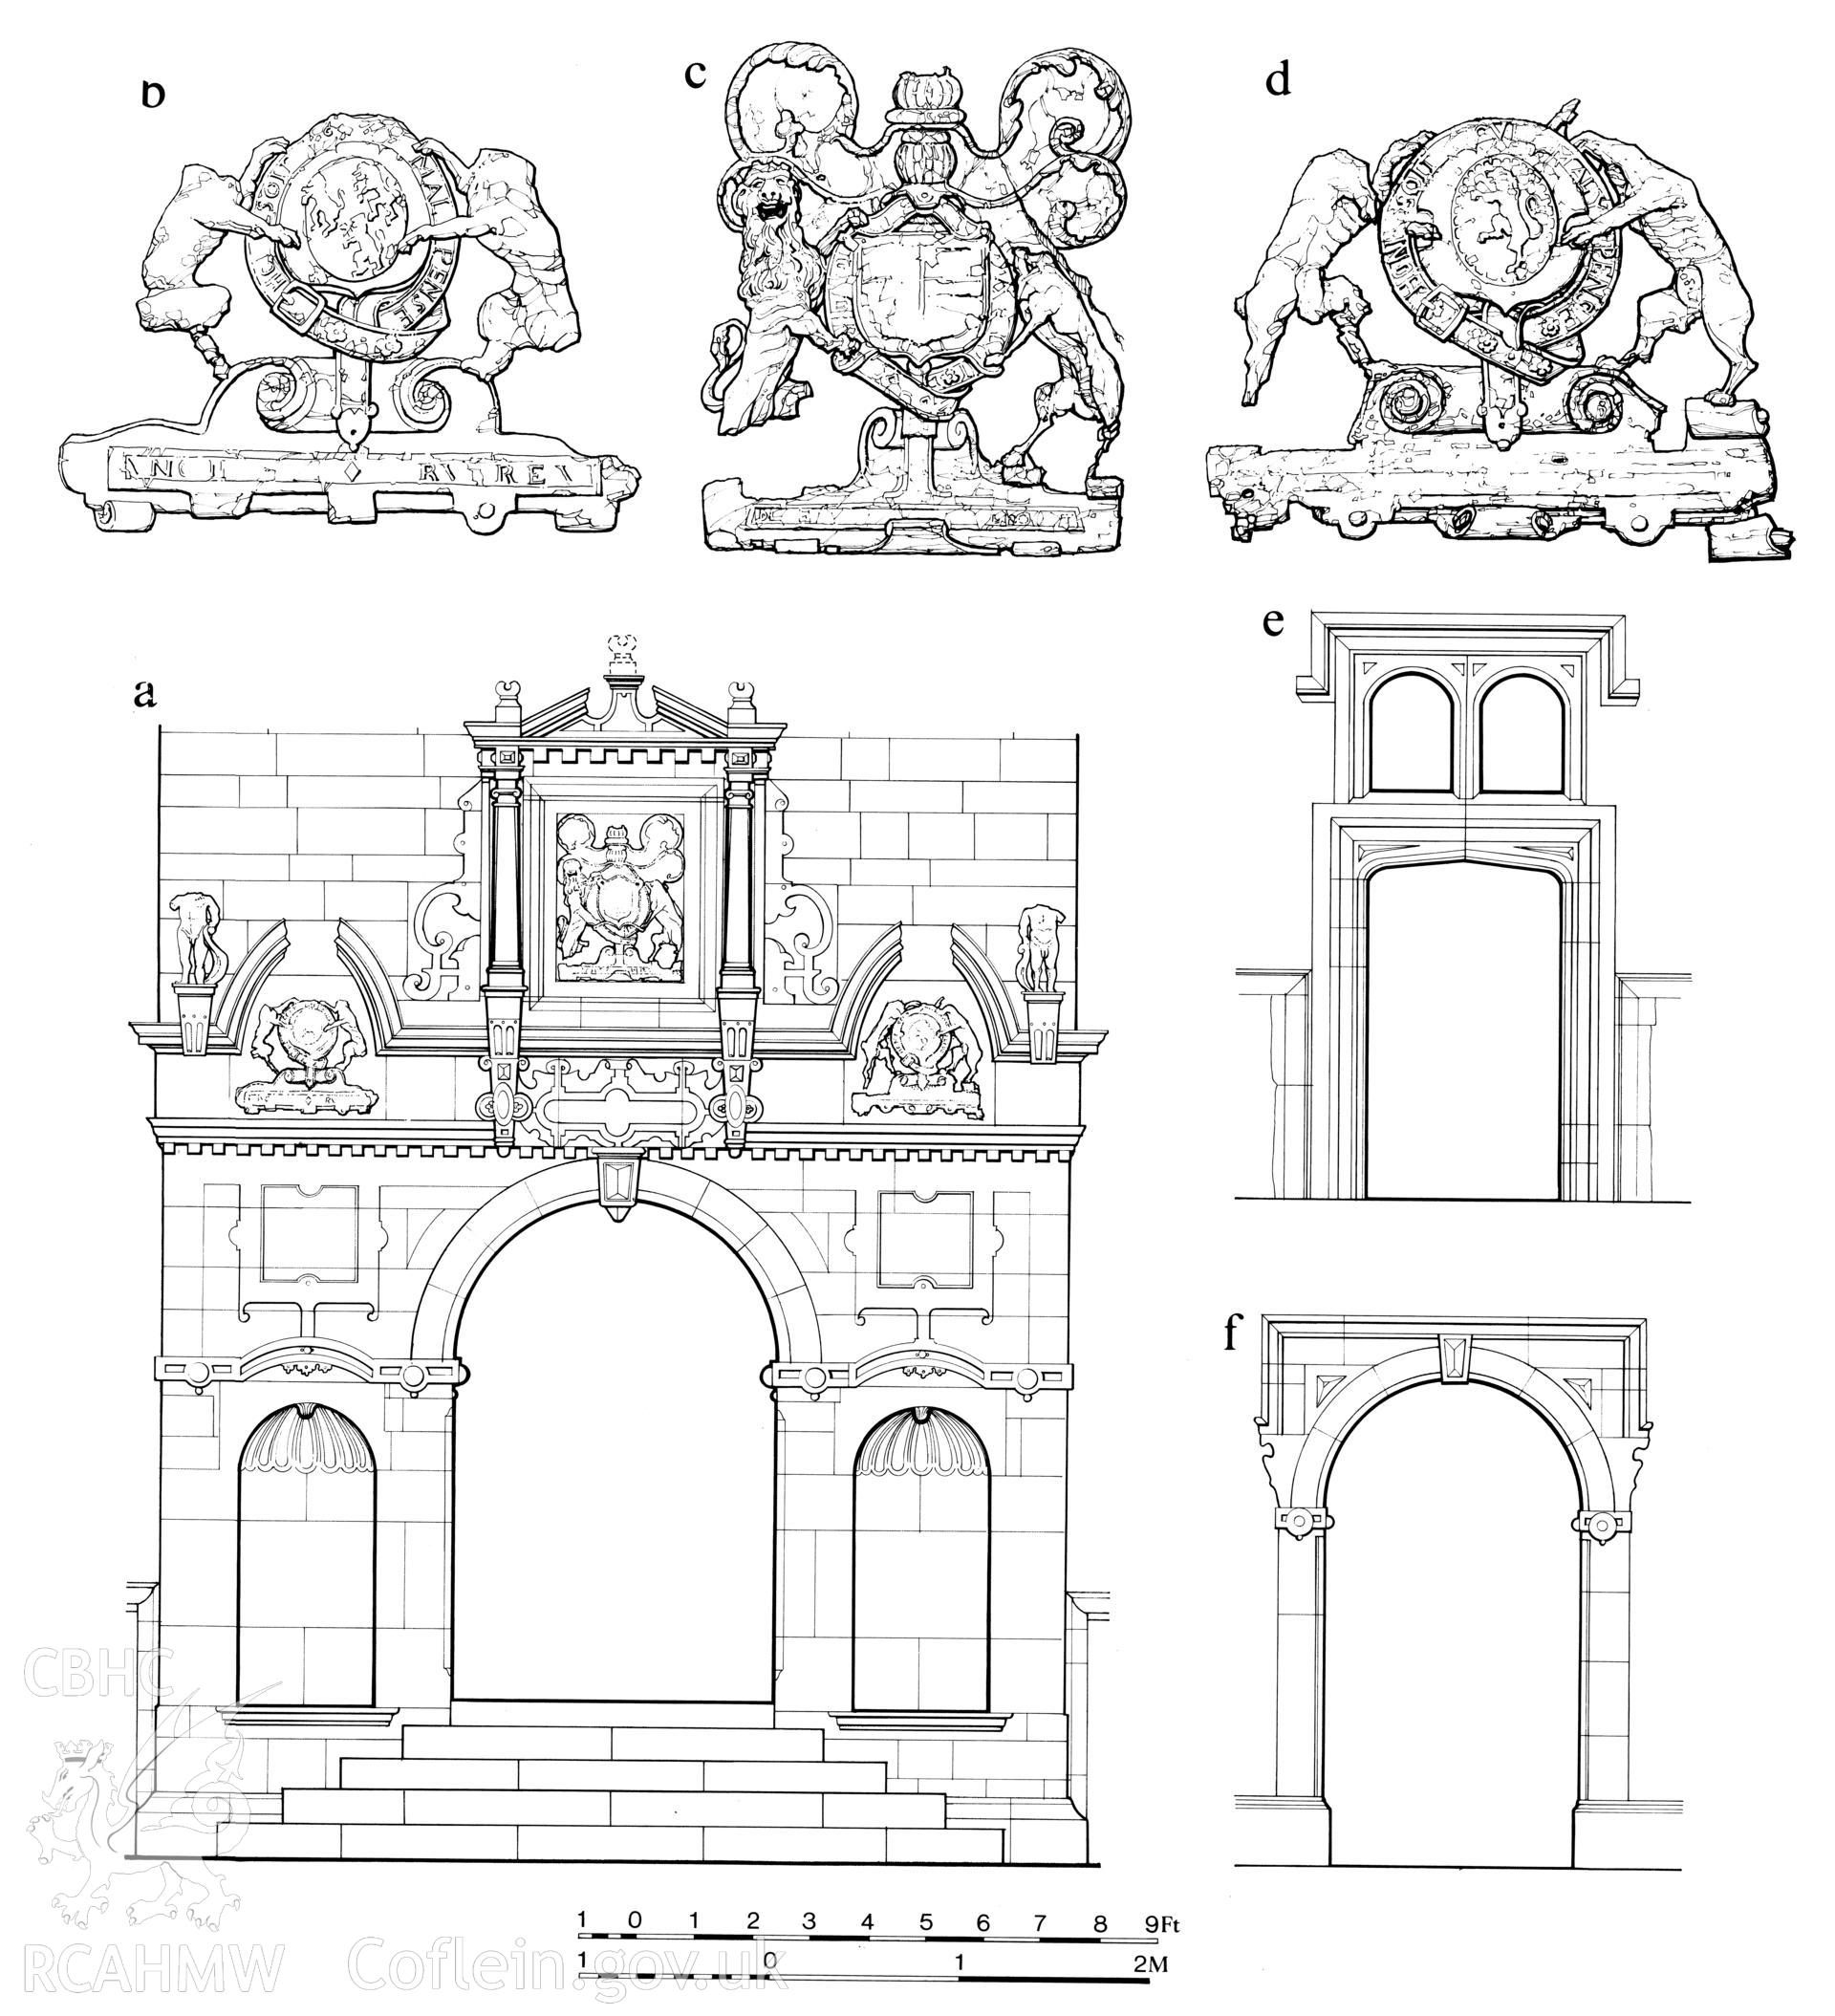 RCAHMW drawing showing detail at Ruperra Castle, Glamorgan, published in Glamorgan IV, fig 86.